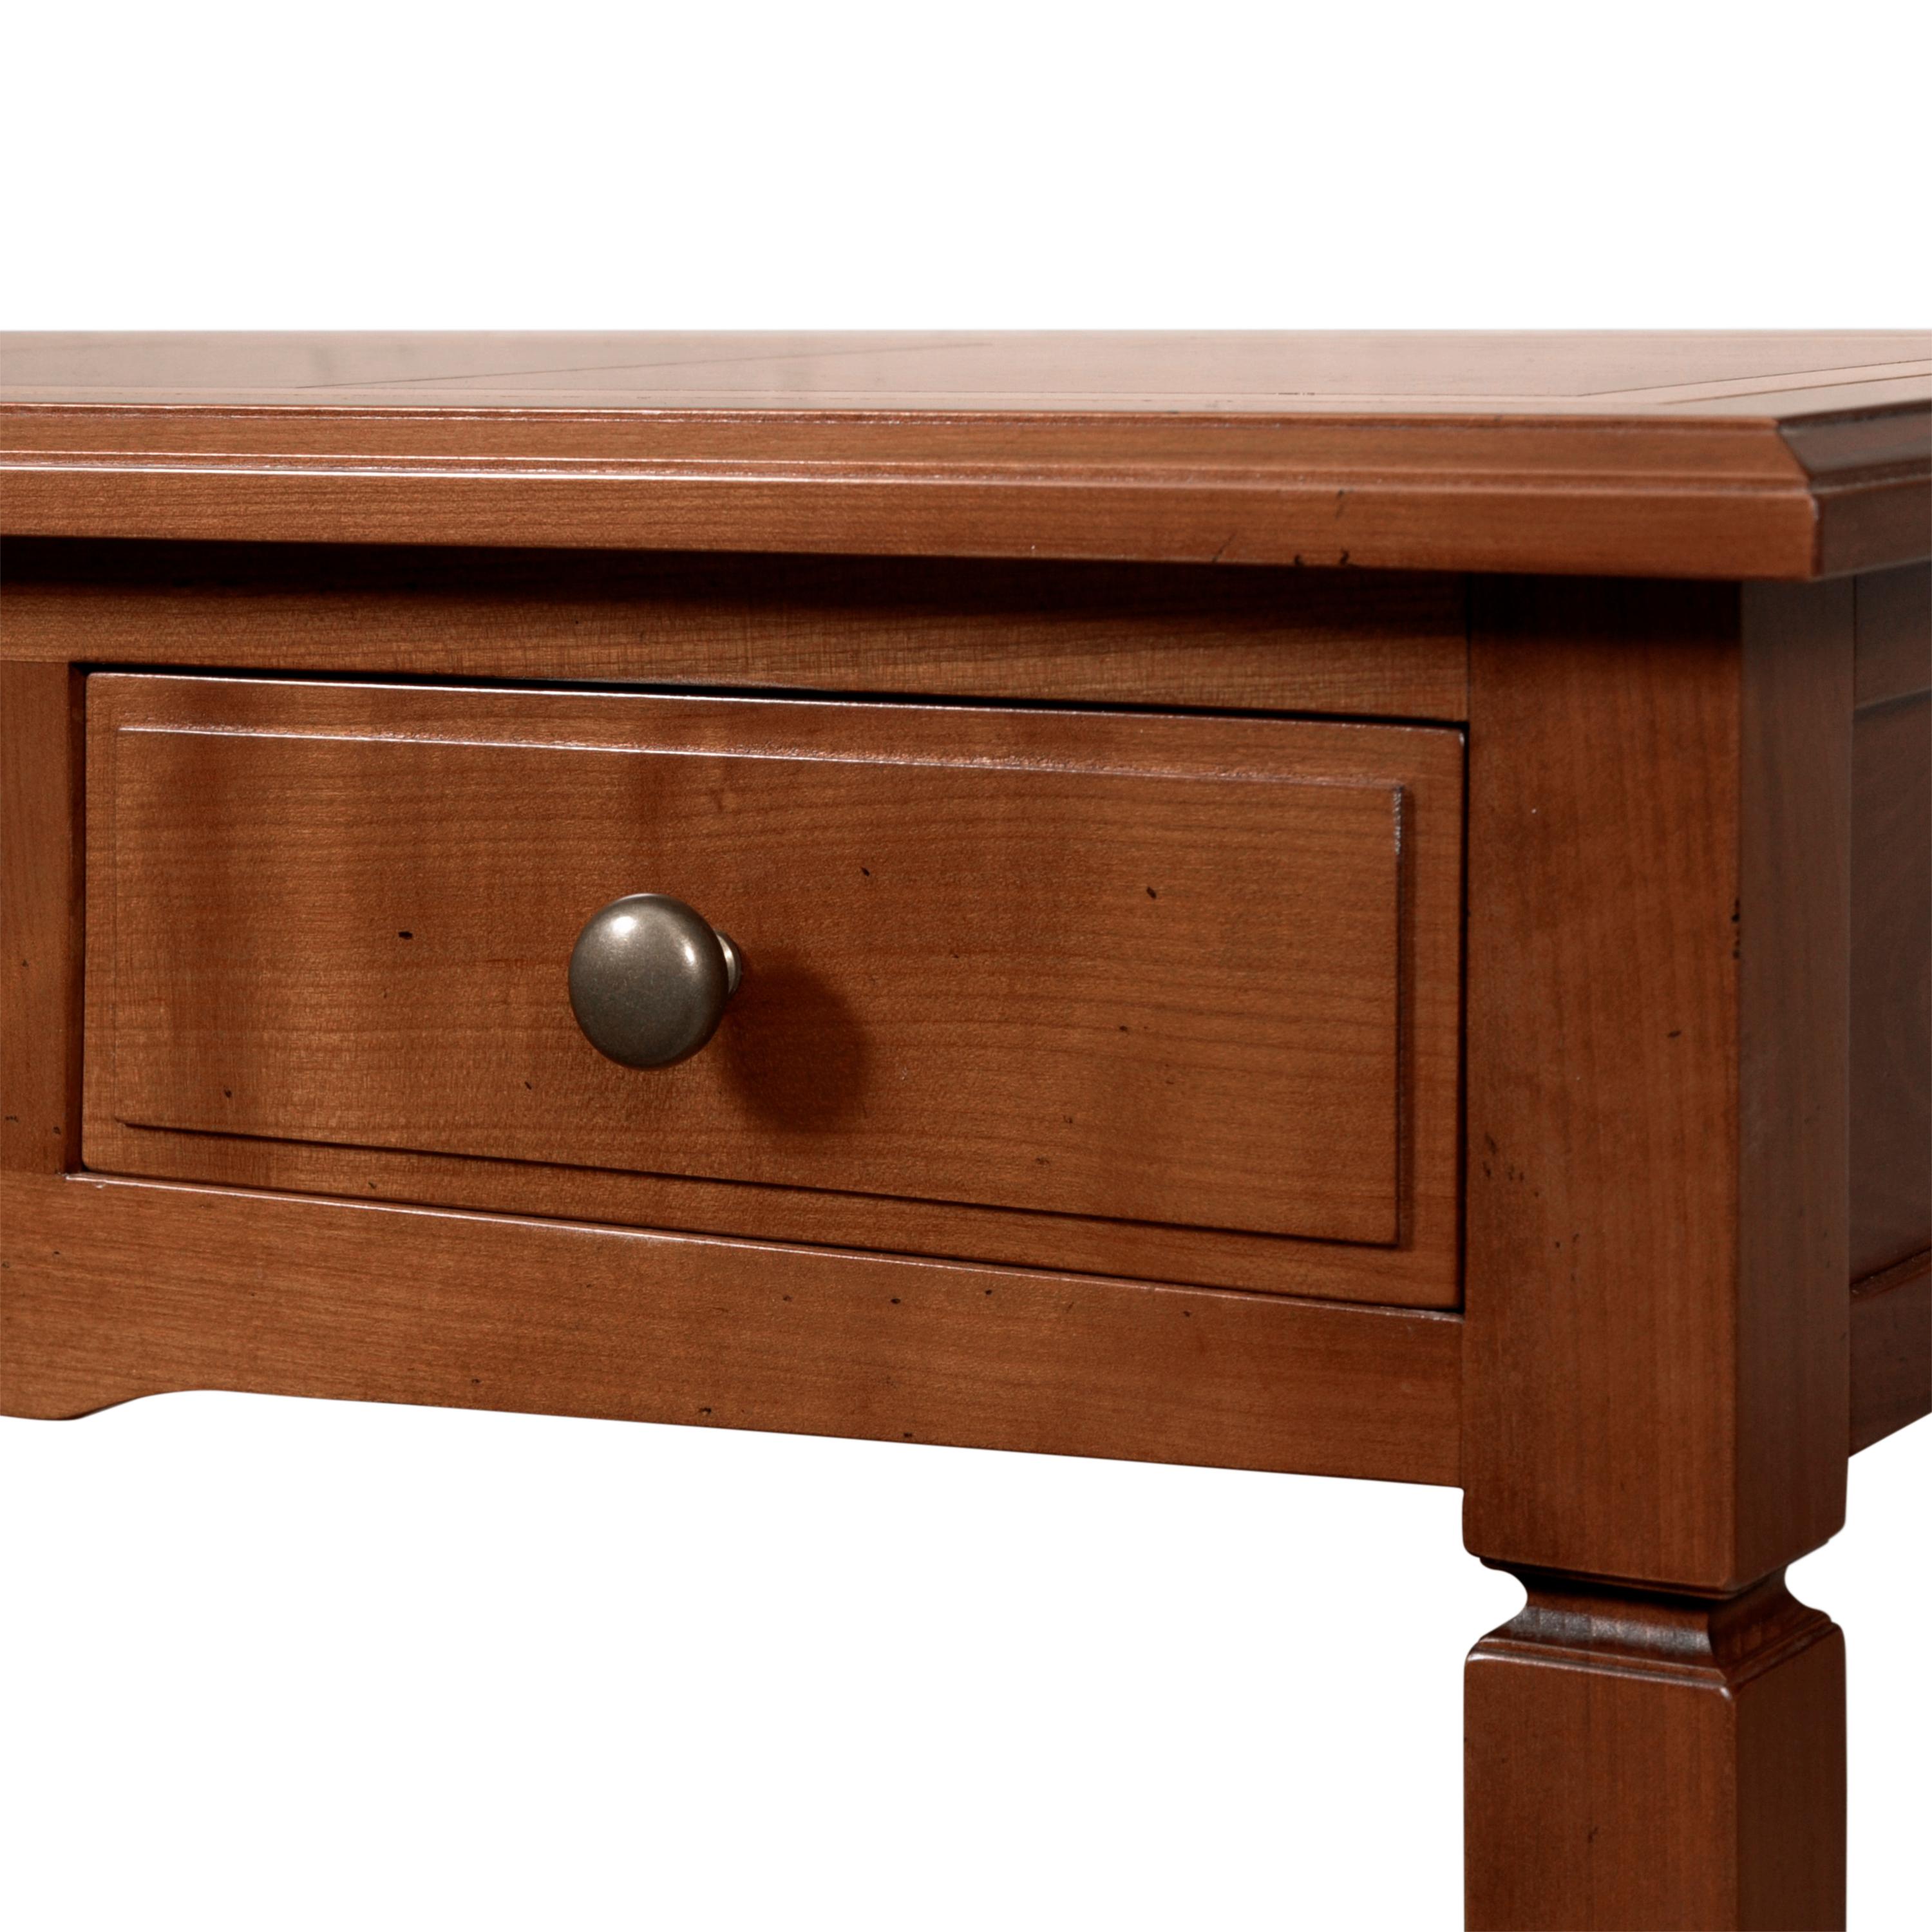 Contemporary Directoire Style Console Table in Cherry with a Secret Drawer Made in France For Sale